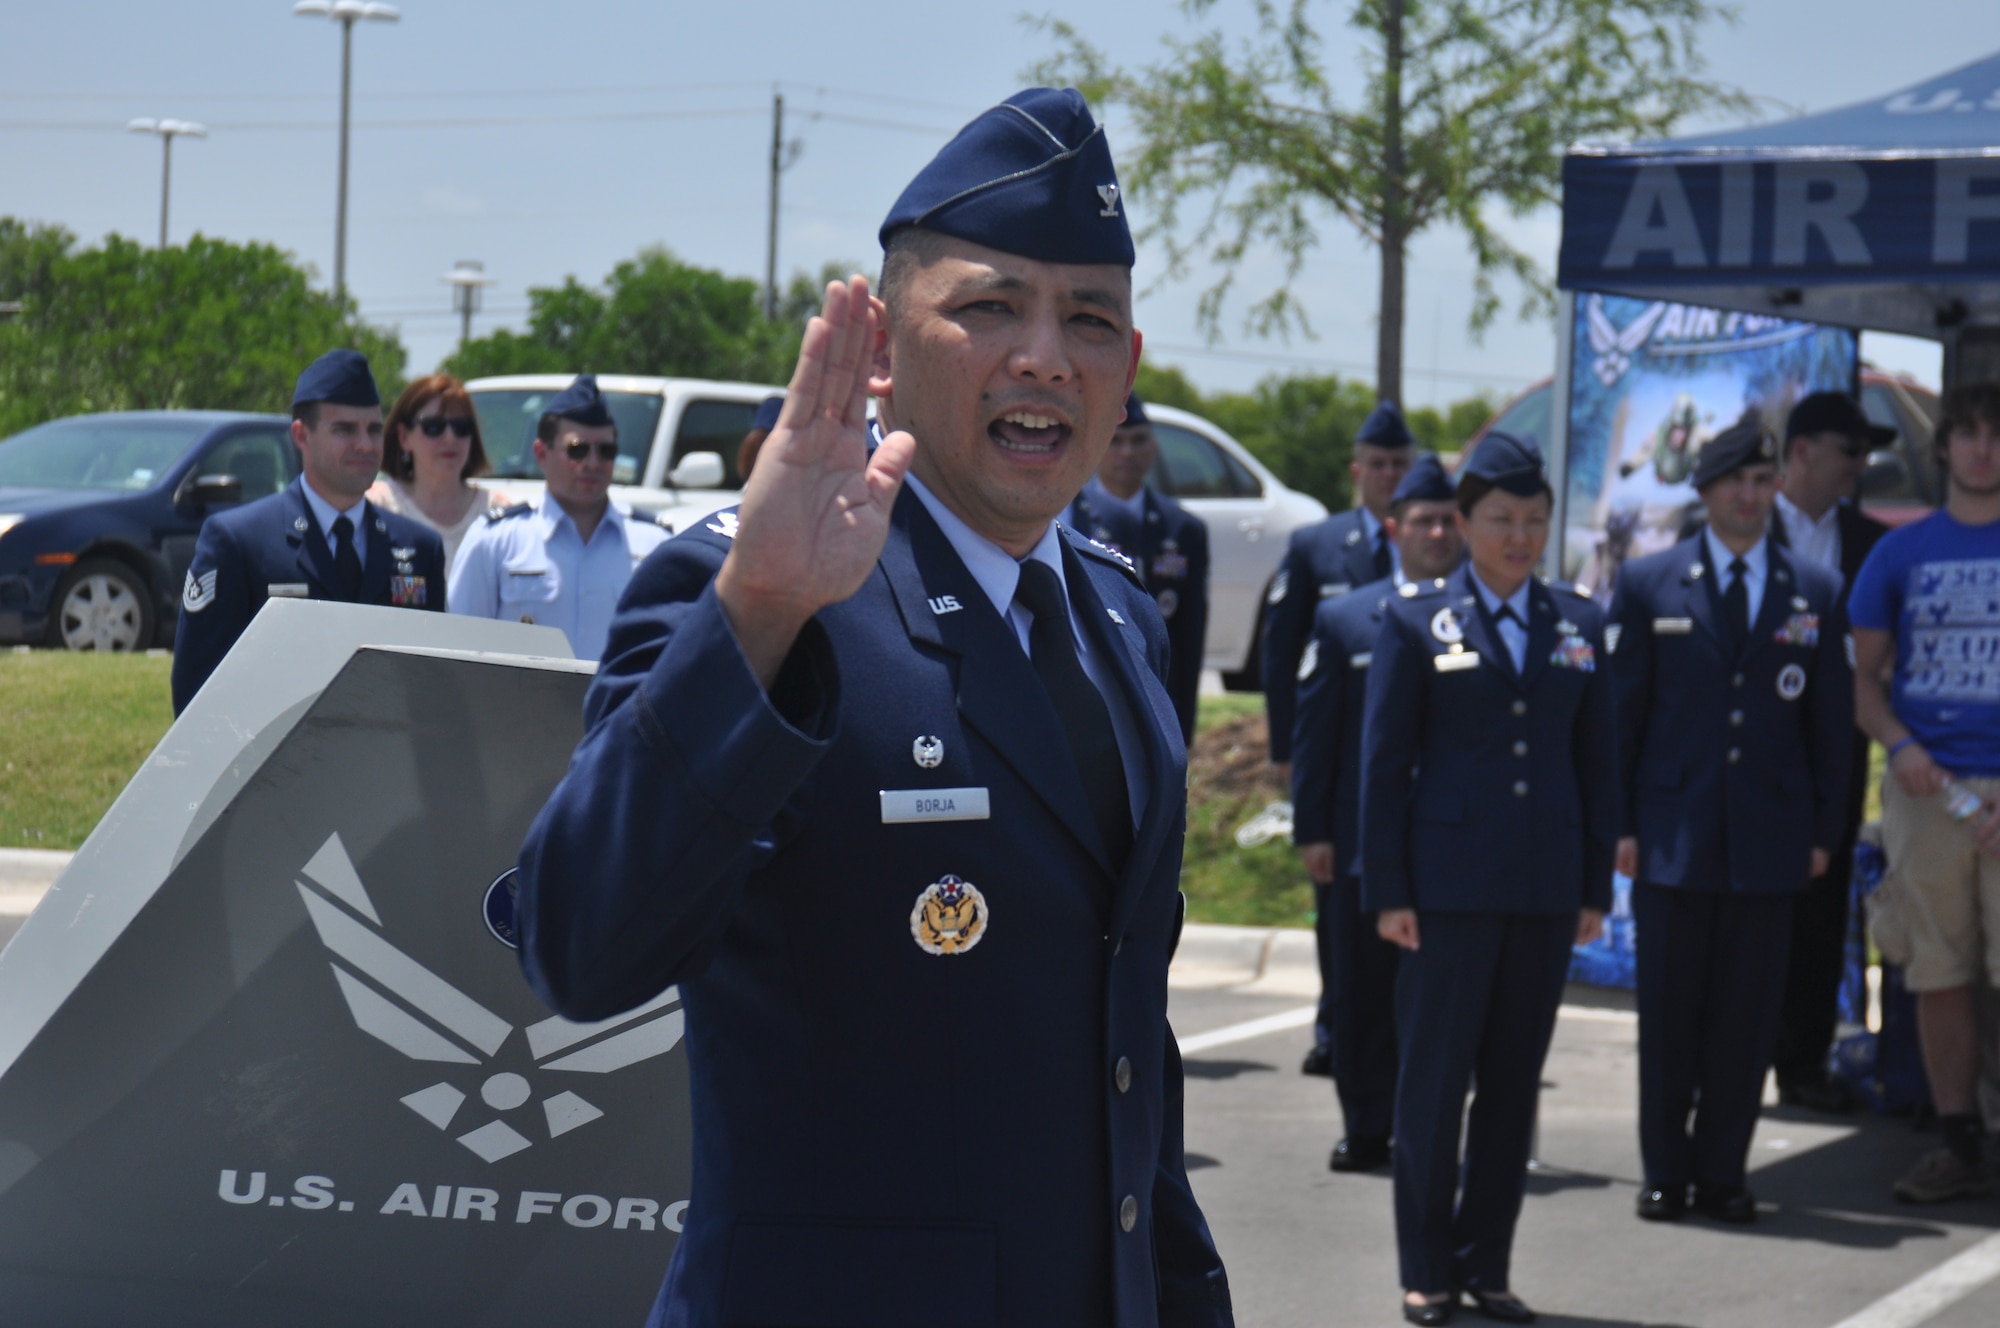 Col. Robert Borja, 369th Recruiting Group commander, administers the oath of enlistment to more than 60 Delayed Entry Program members at the opening ceremony of the 341st Recruiting Squadron hub in Austin, Texas, Aug. 1.  (U.S. Air Force photo/Staff Sgt. Hillary Stonemetz)